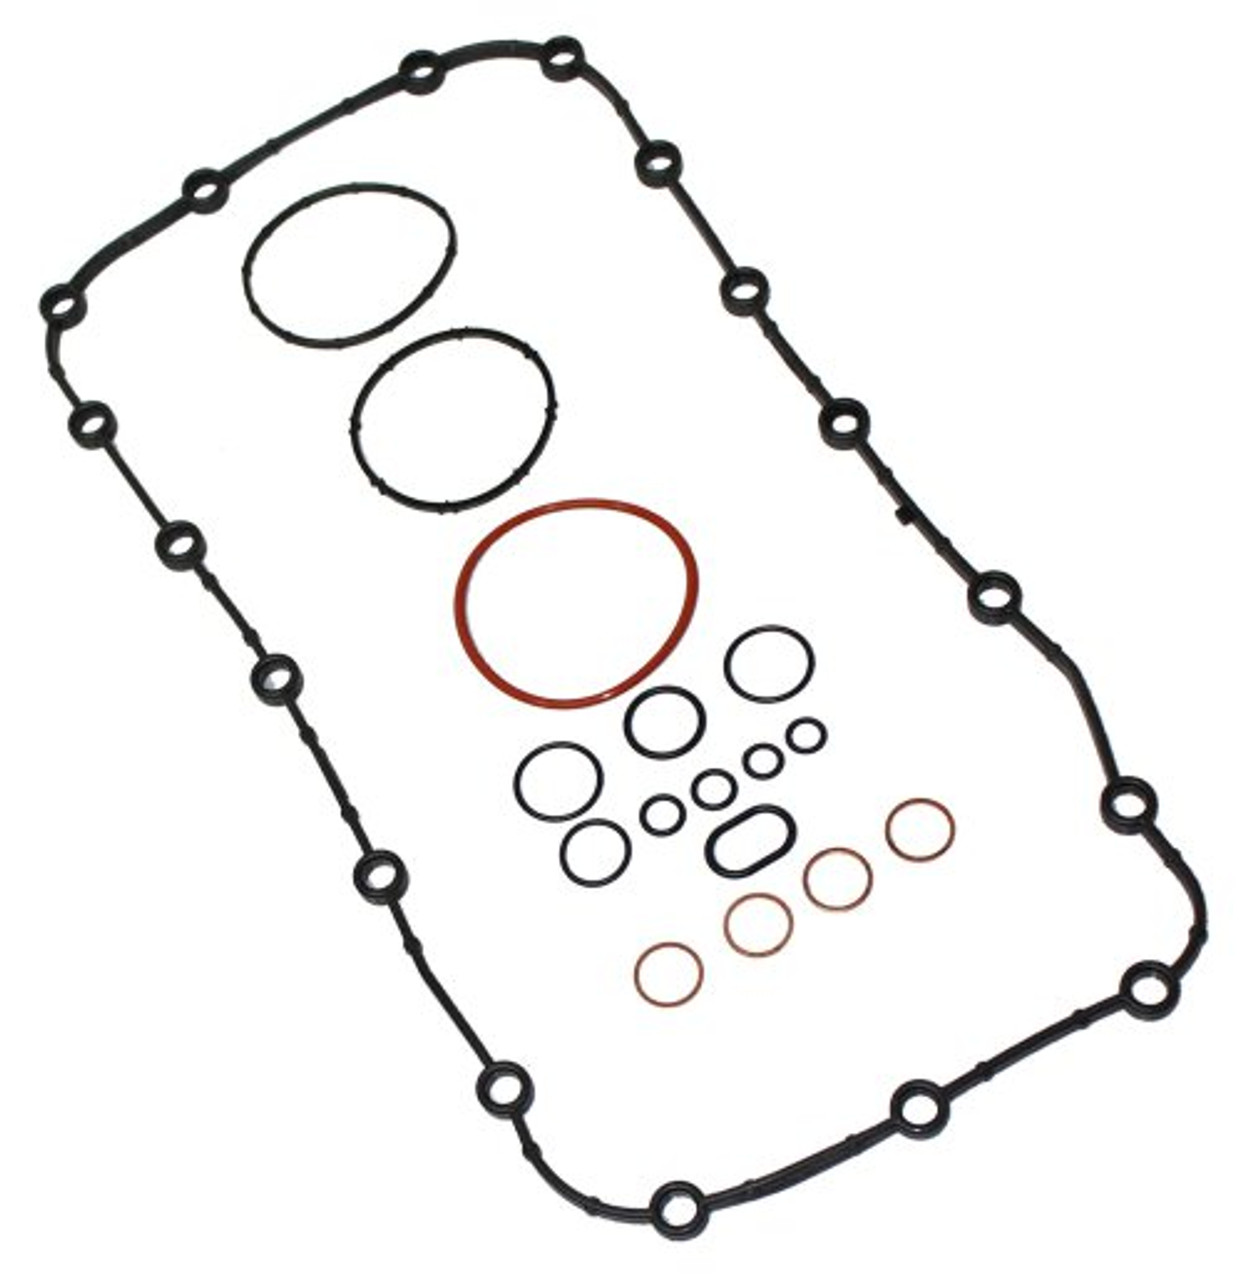 Lower Gasket Set - 1998 Cadillac Catera 3.0L Engine Parts # LGS3105ZE2